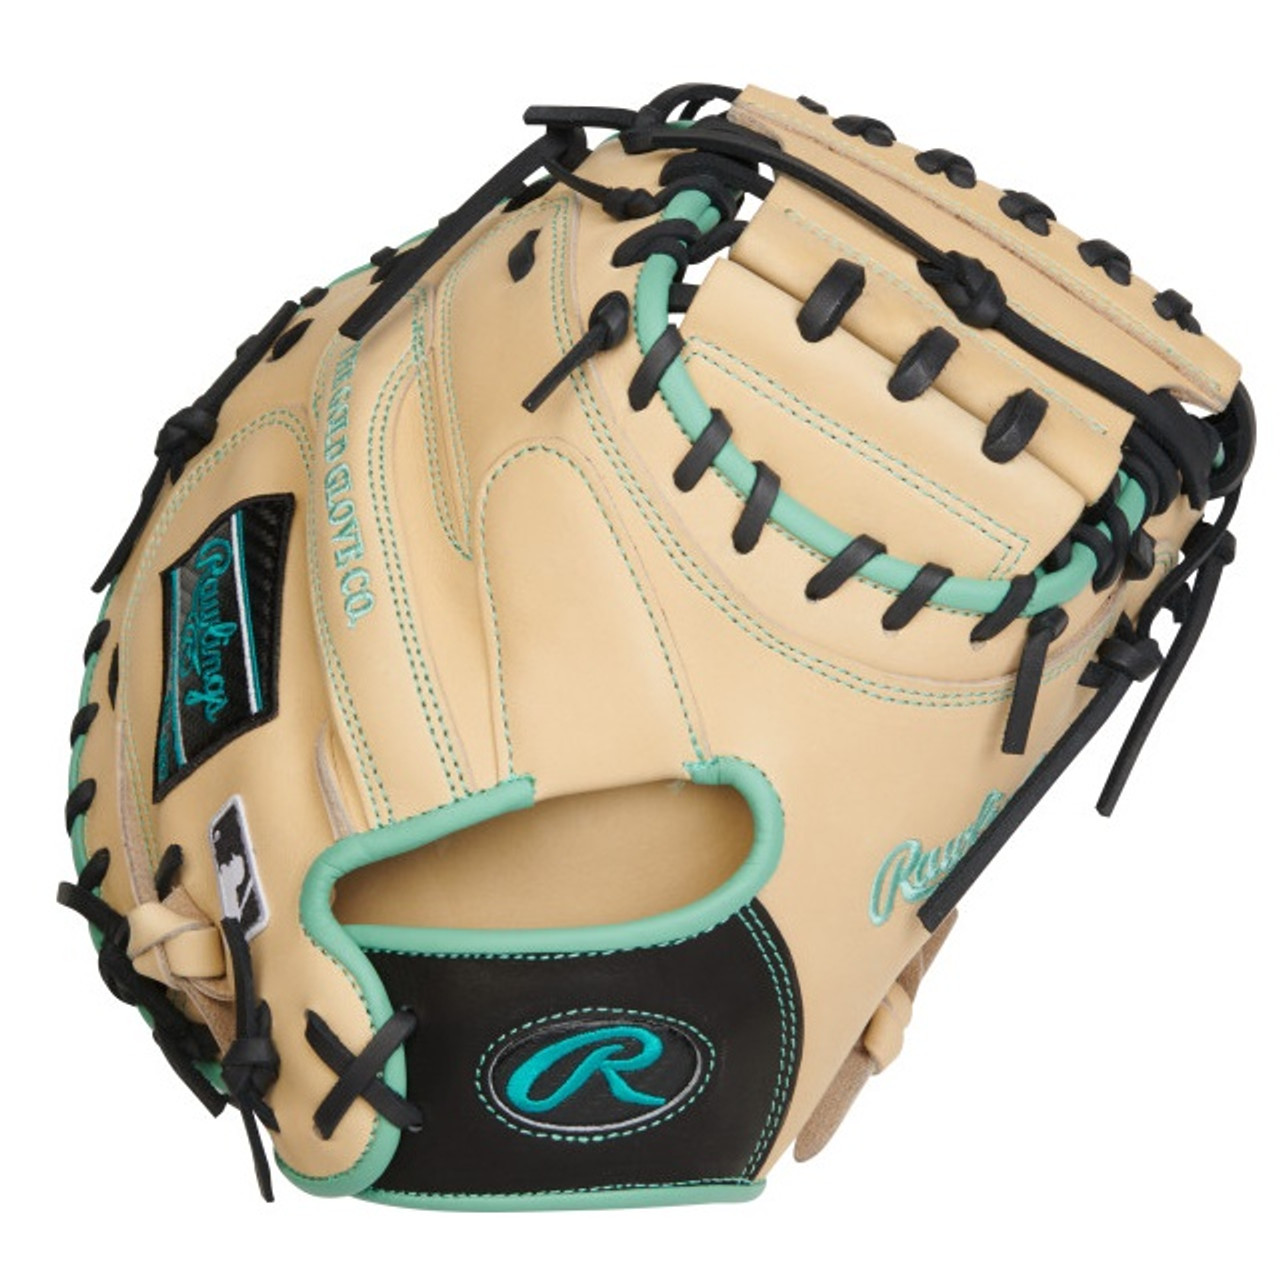 A detailed view of the custom Rawlings baseball glove worn by